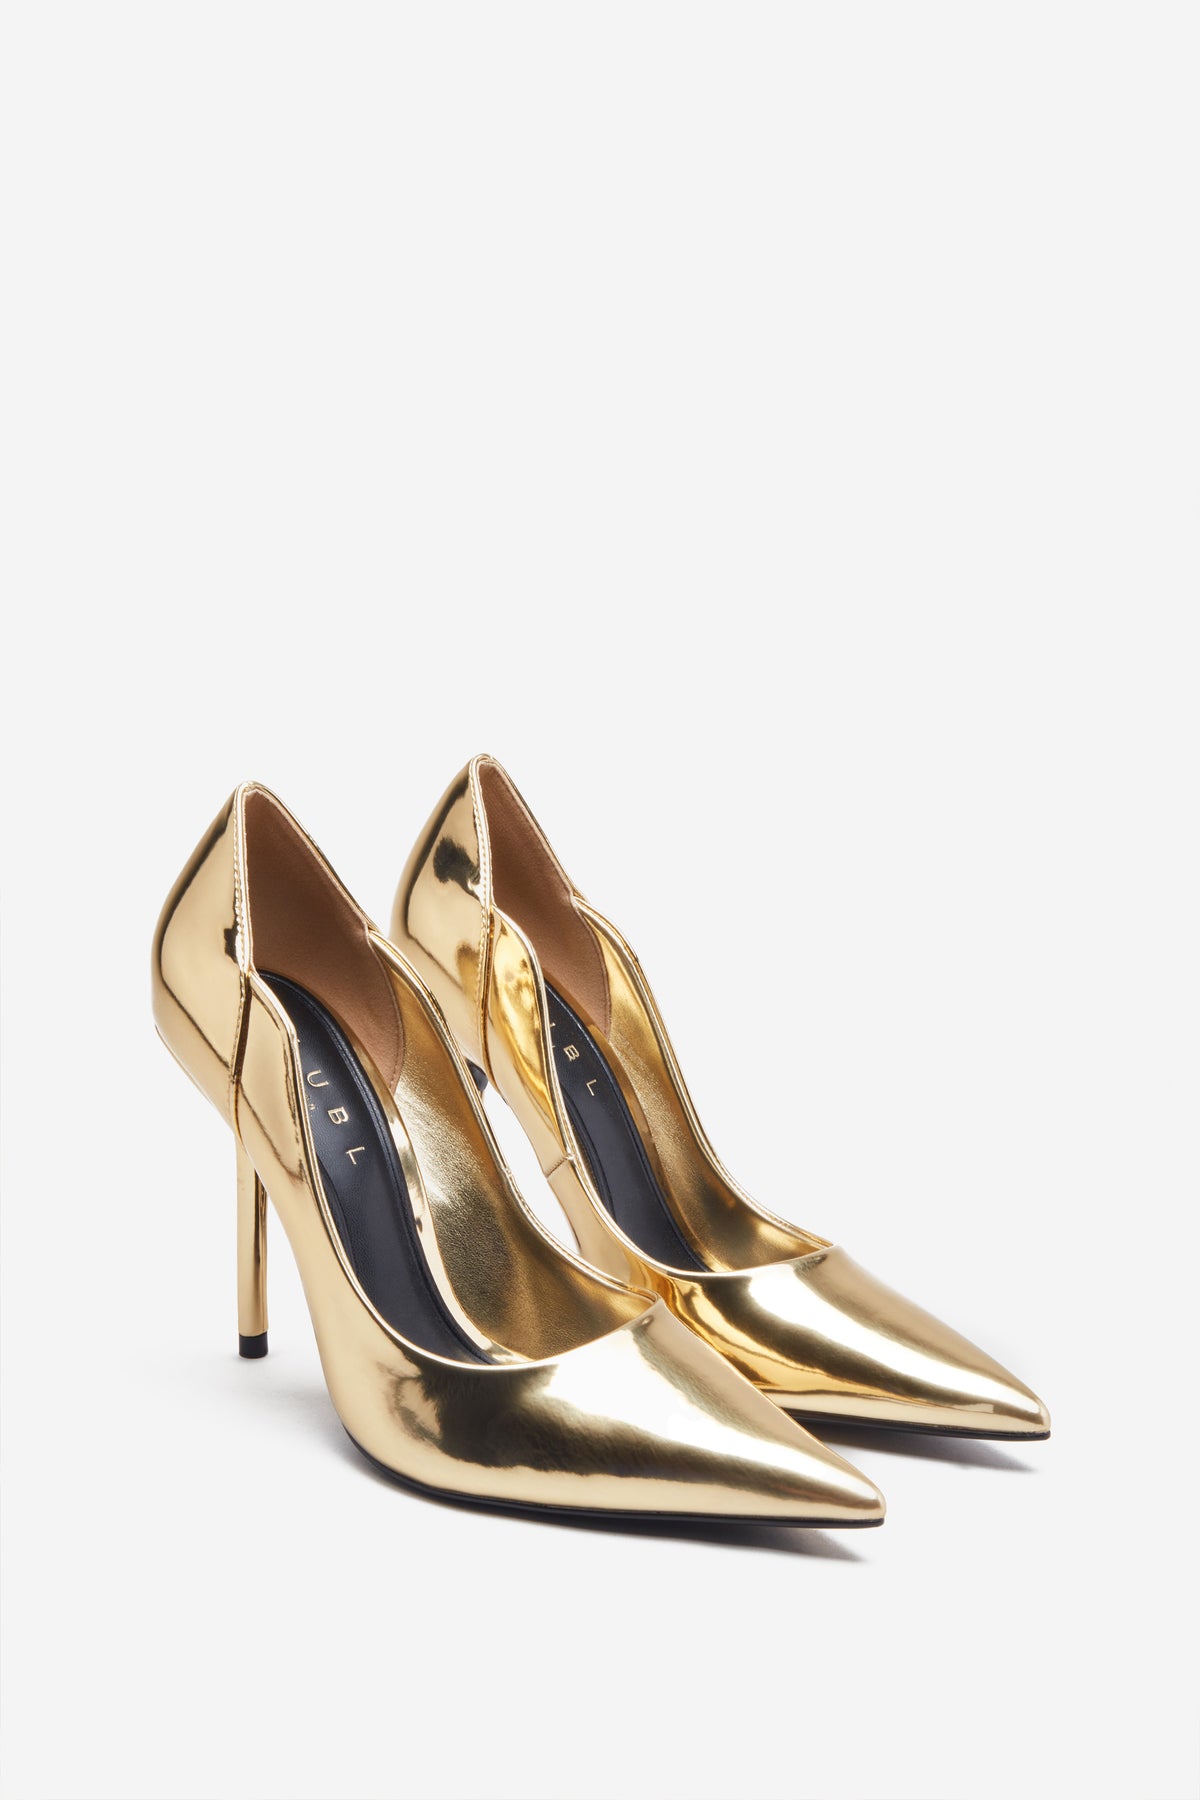 gold high heels Archives - Nooshoes